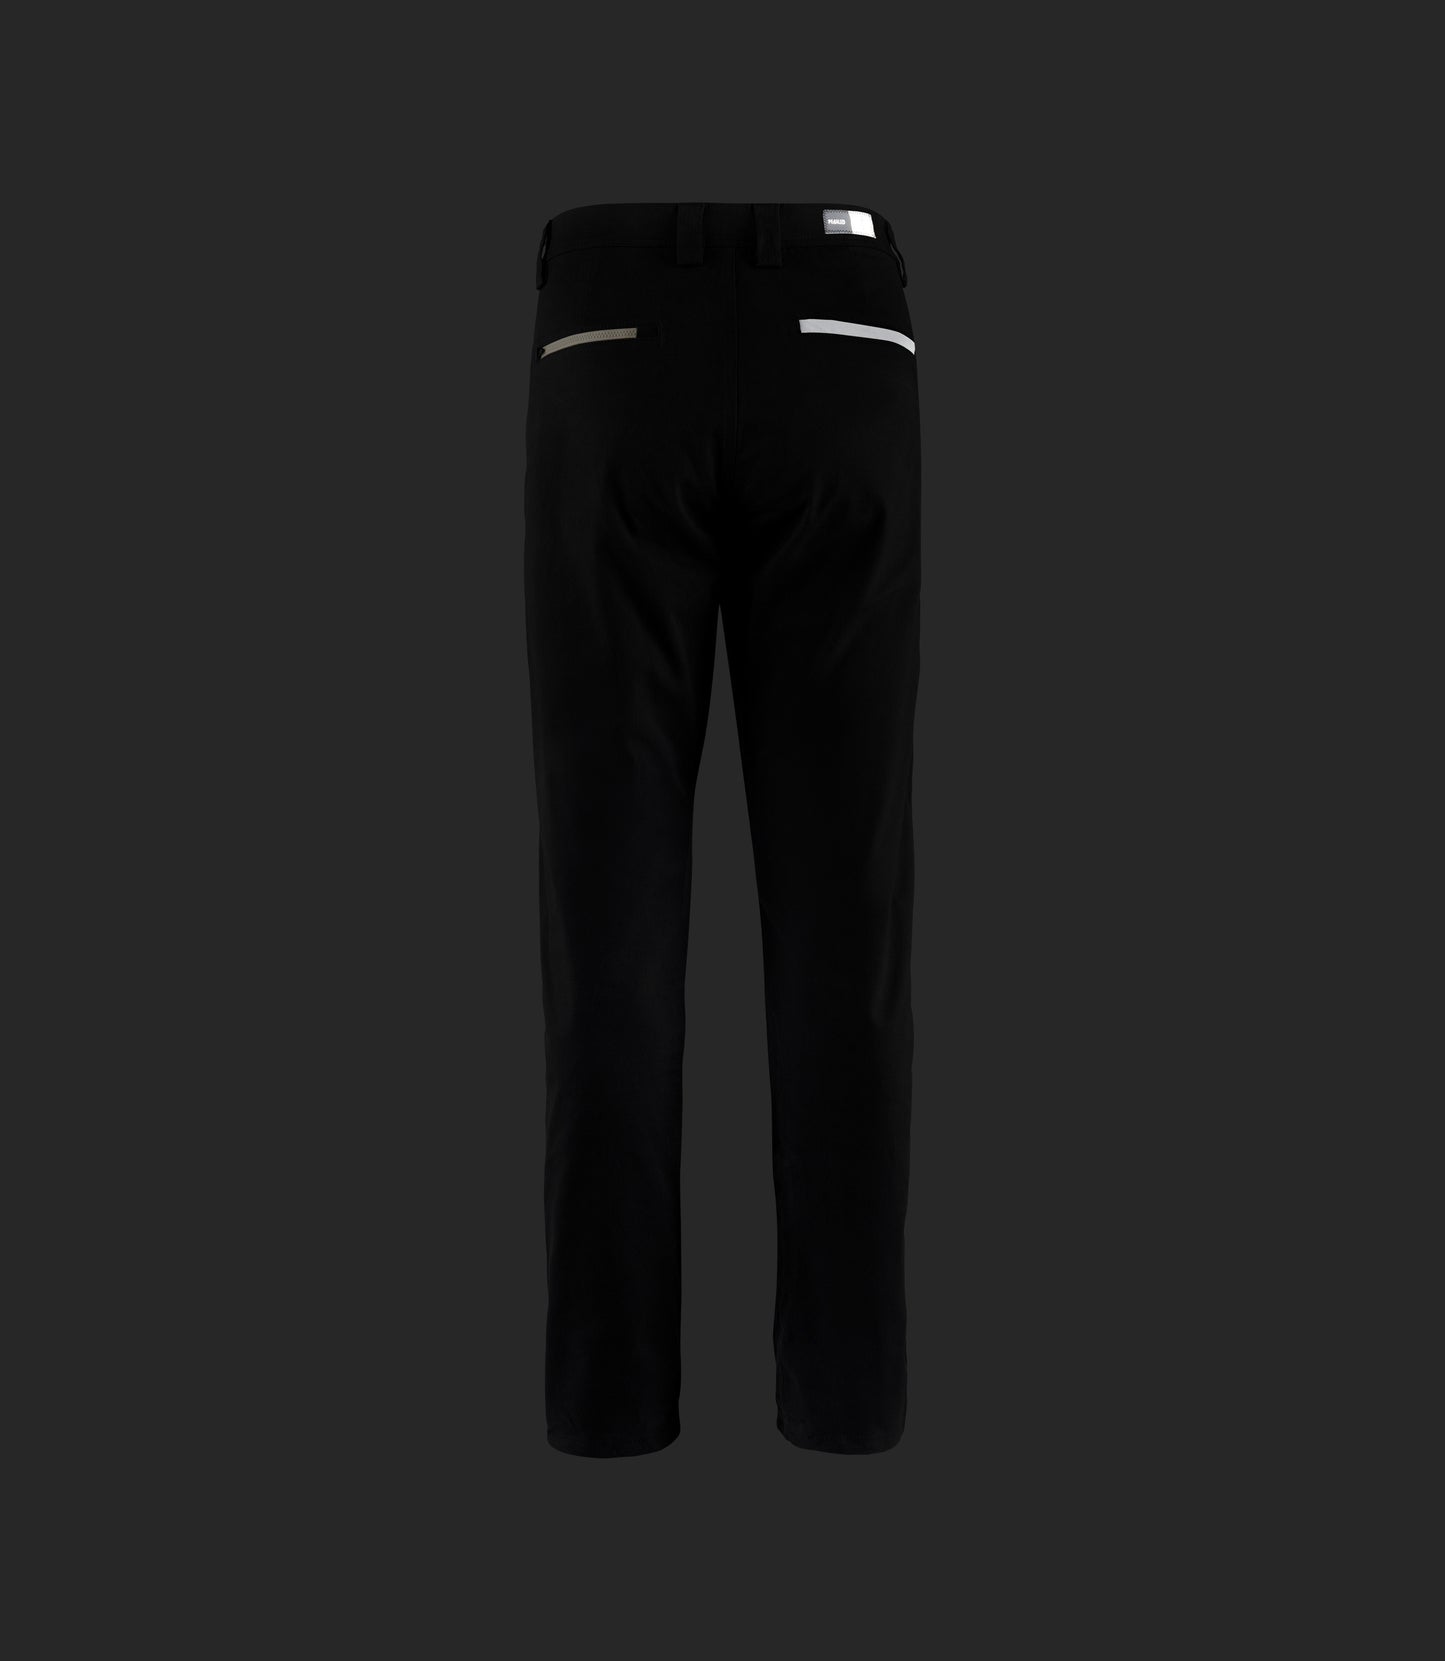 24WCCUR00PE_3_men cycling chino black urban back reflective pedaled